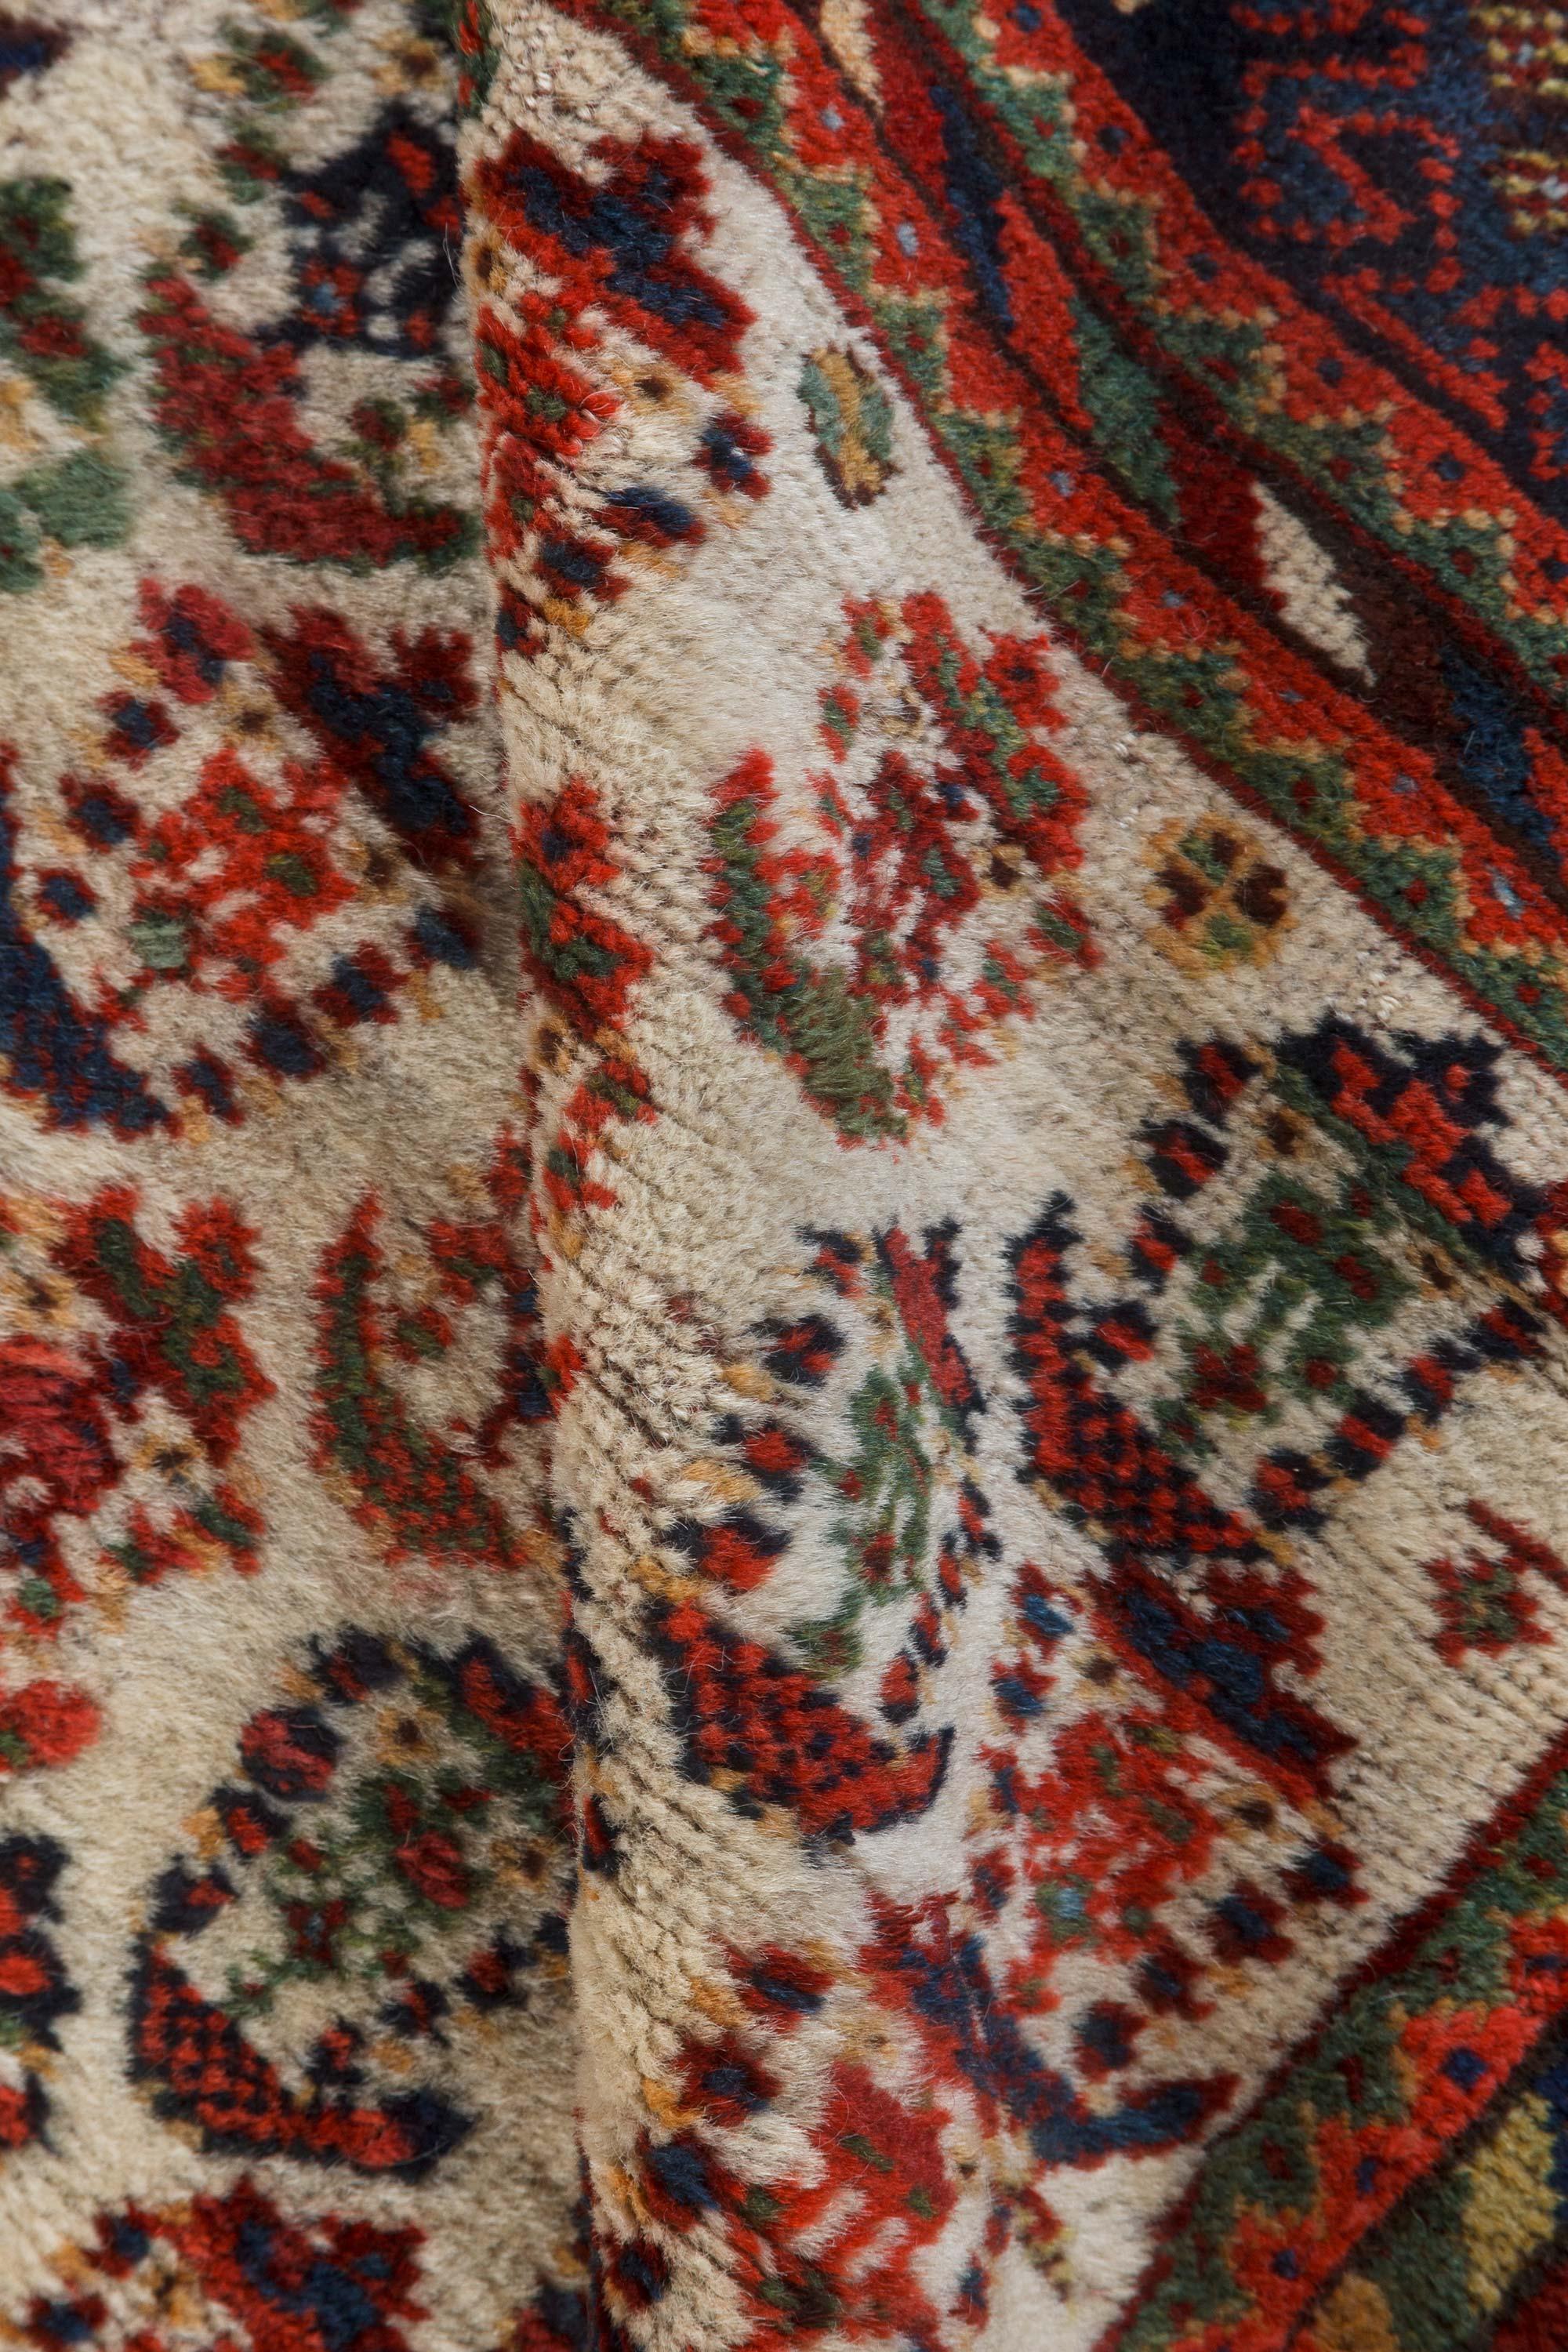 Authentic Persian Afshar Blue, Brown, Green, Red, White Rug.
Size: 5'3